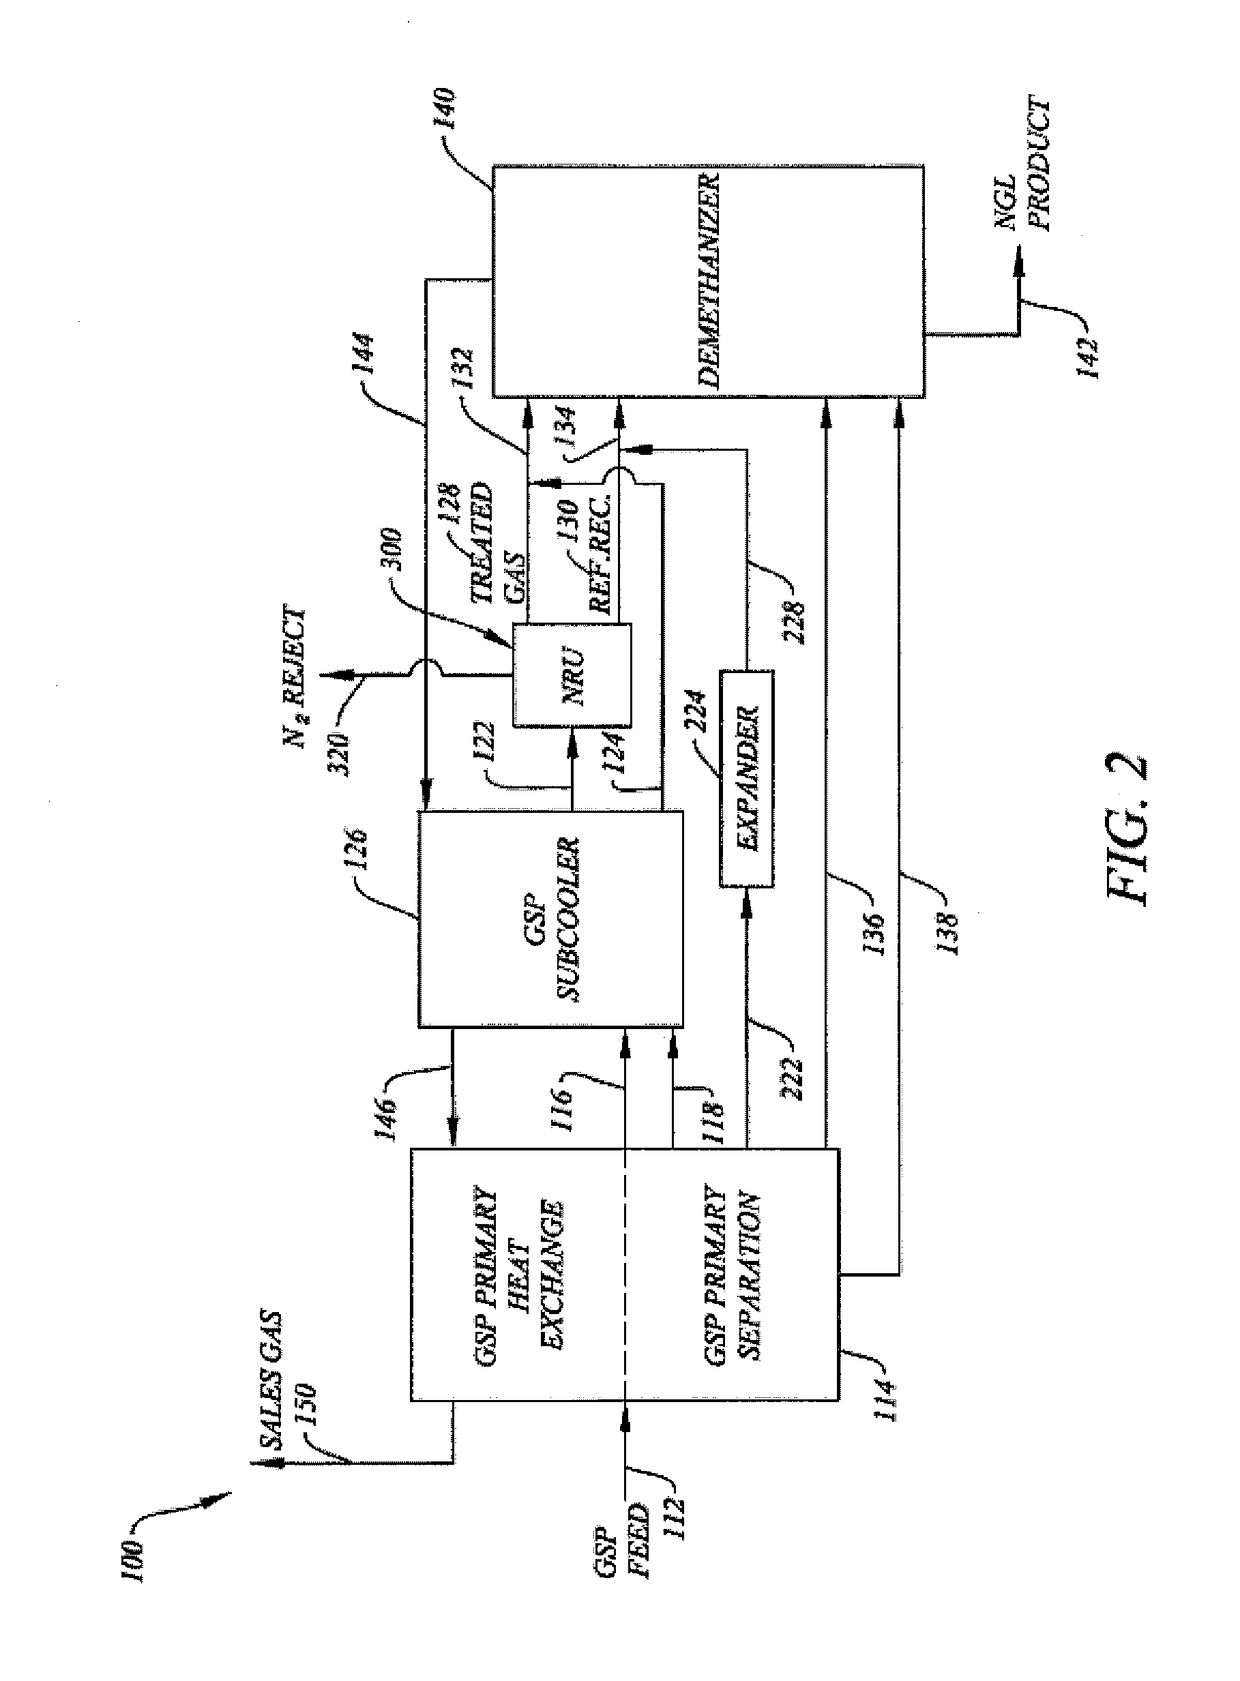 System and Method for Reducing Nitrogen Content of GSP/Expander Product Streams for Pipeline Transport